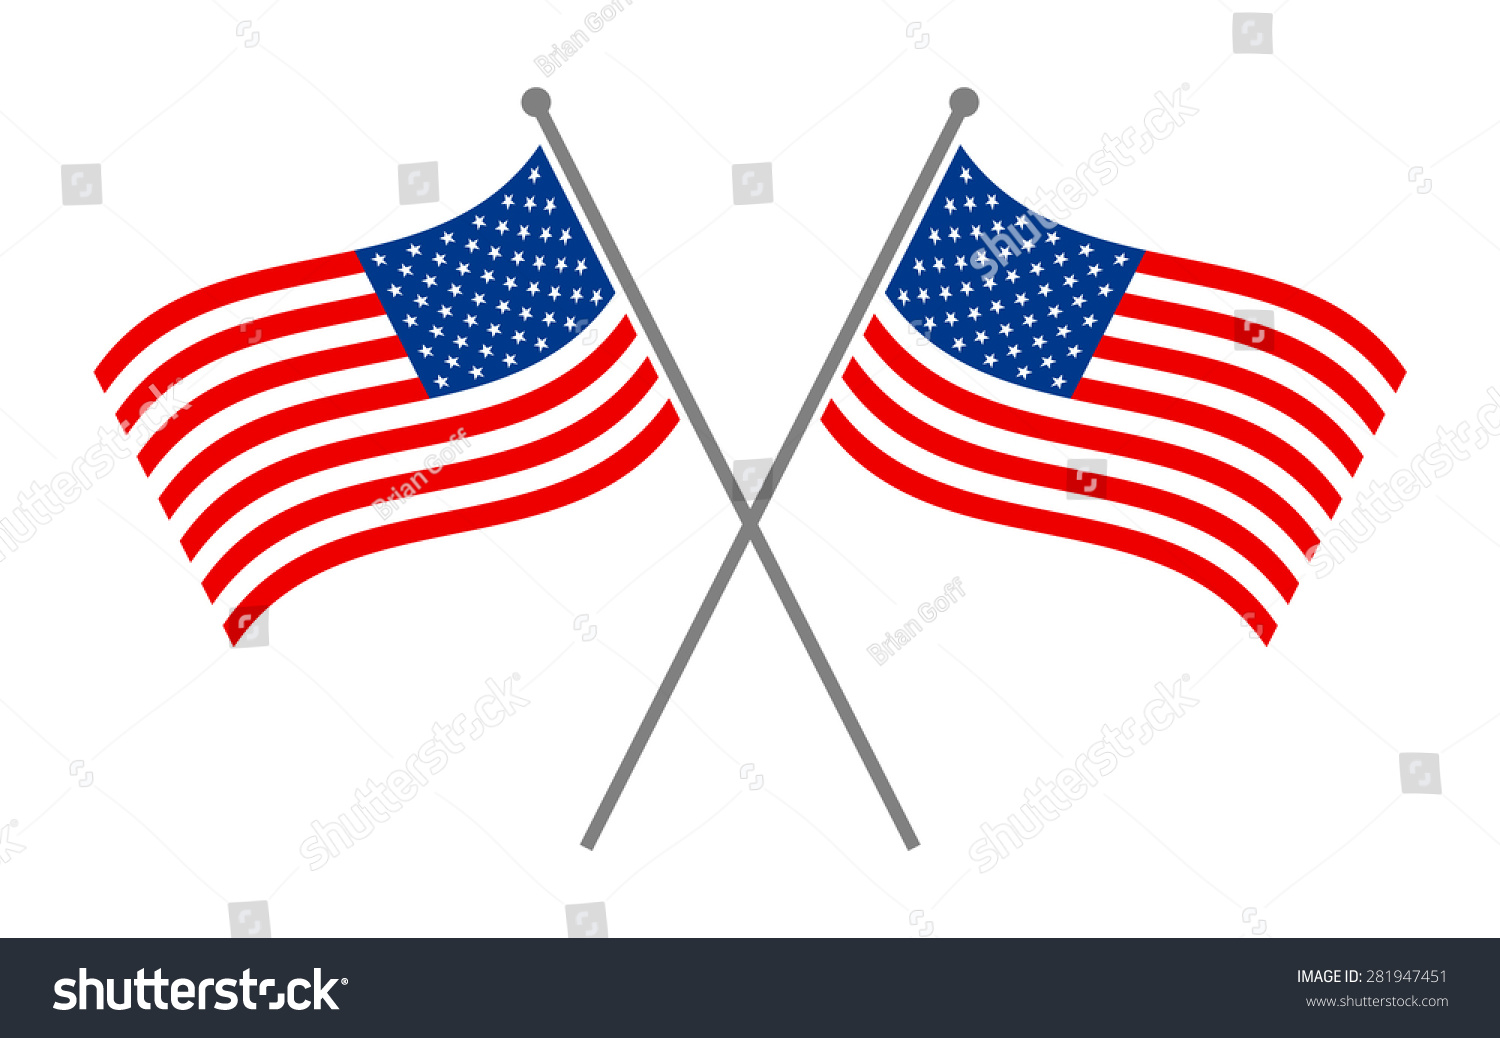 9954 Crossed American Flags Stock Illustrations Images And Vectors Shutterstock 6215